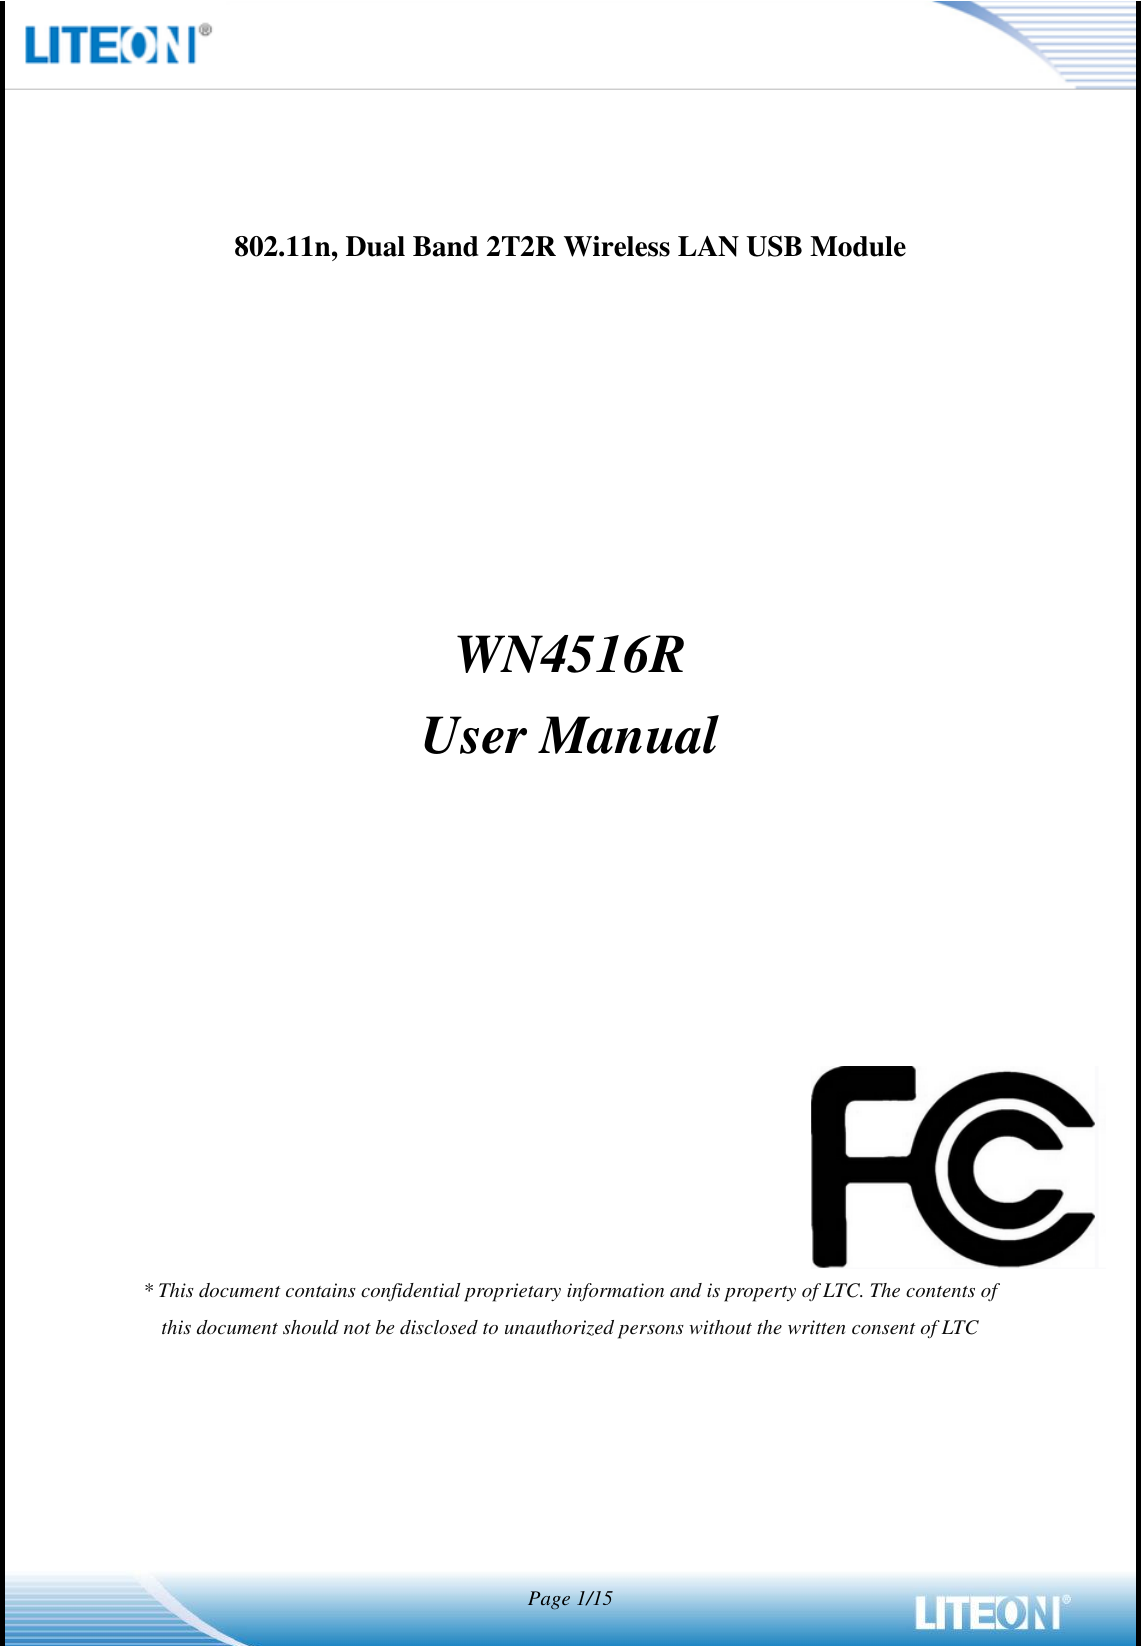   Page 1/15             802.11n, Dual Band 2T2R Wireless LAN USB Module      WN4516R User Manual              * This document contains confidential proprietary information and is property of LTC. The contents of this document should not be disclosed to unauthorized persons without the written consent of LTC  